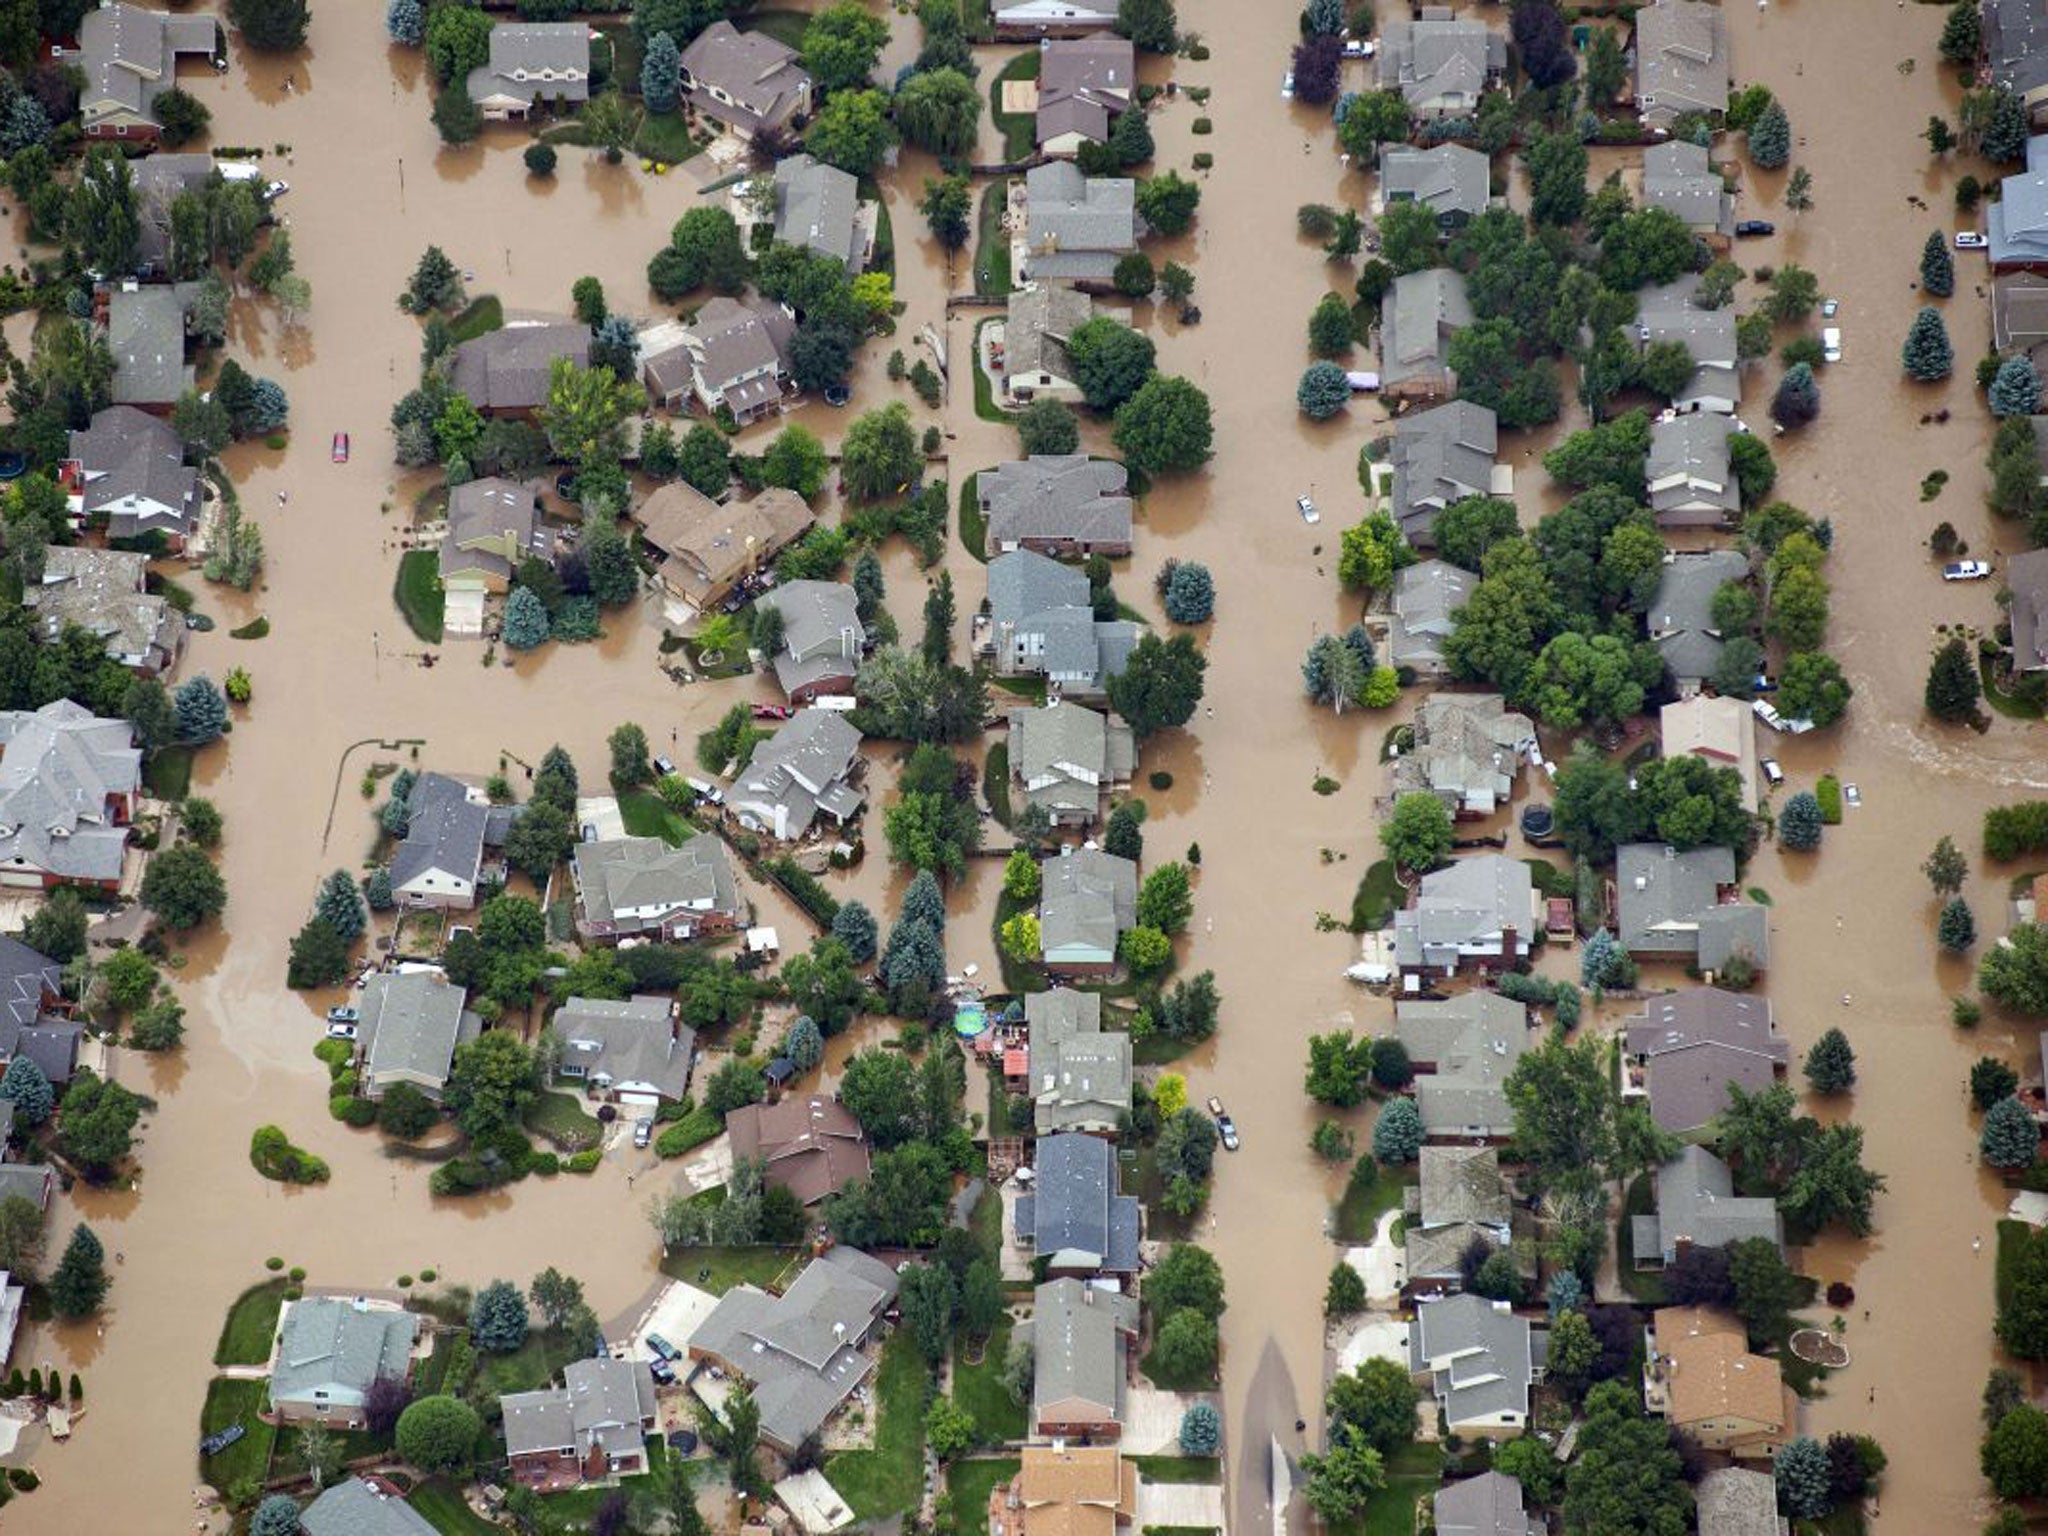 Homes in residential neighborhood in Longmont, Colorado, are submerged